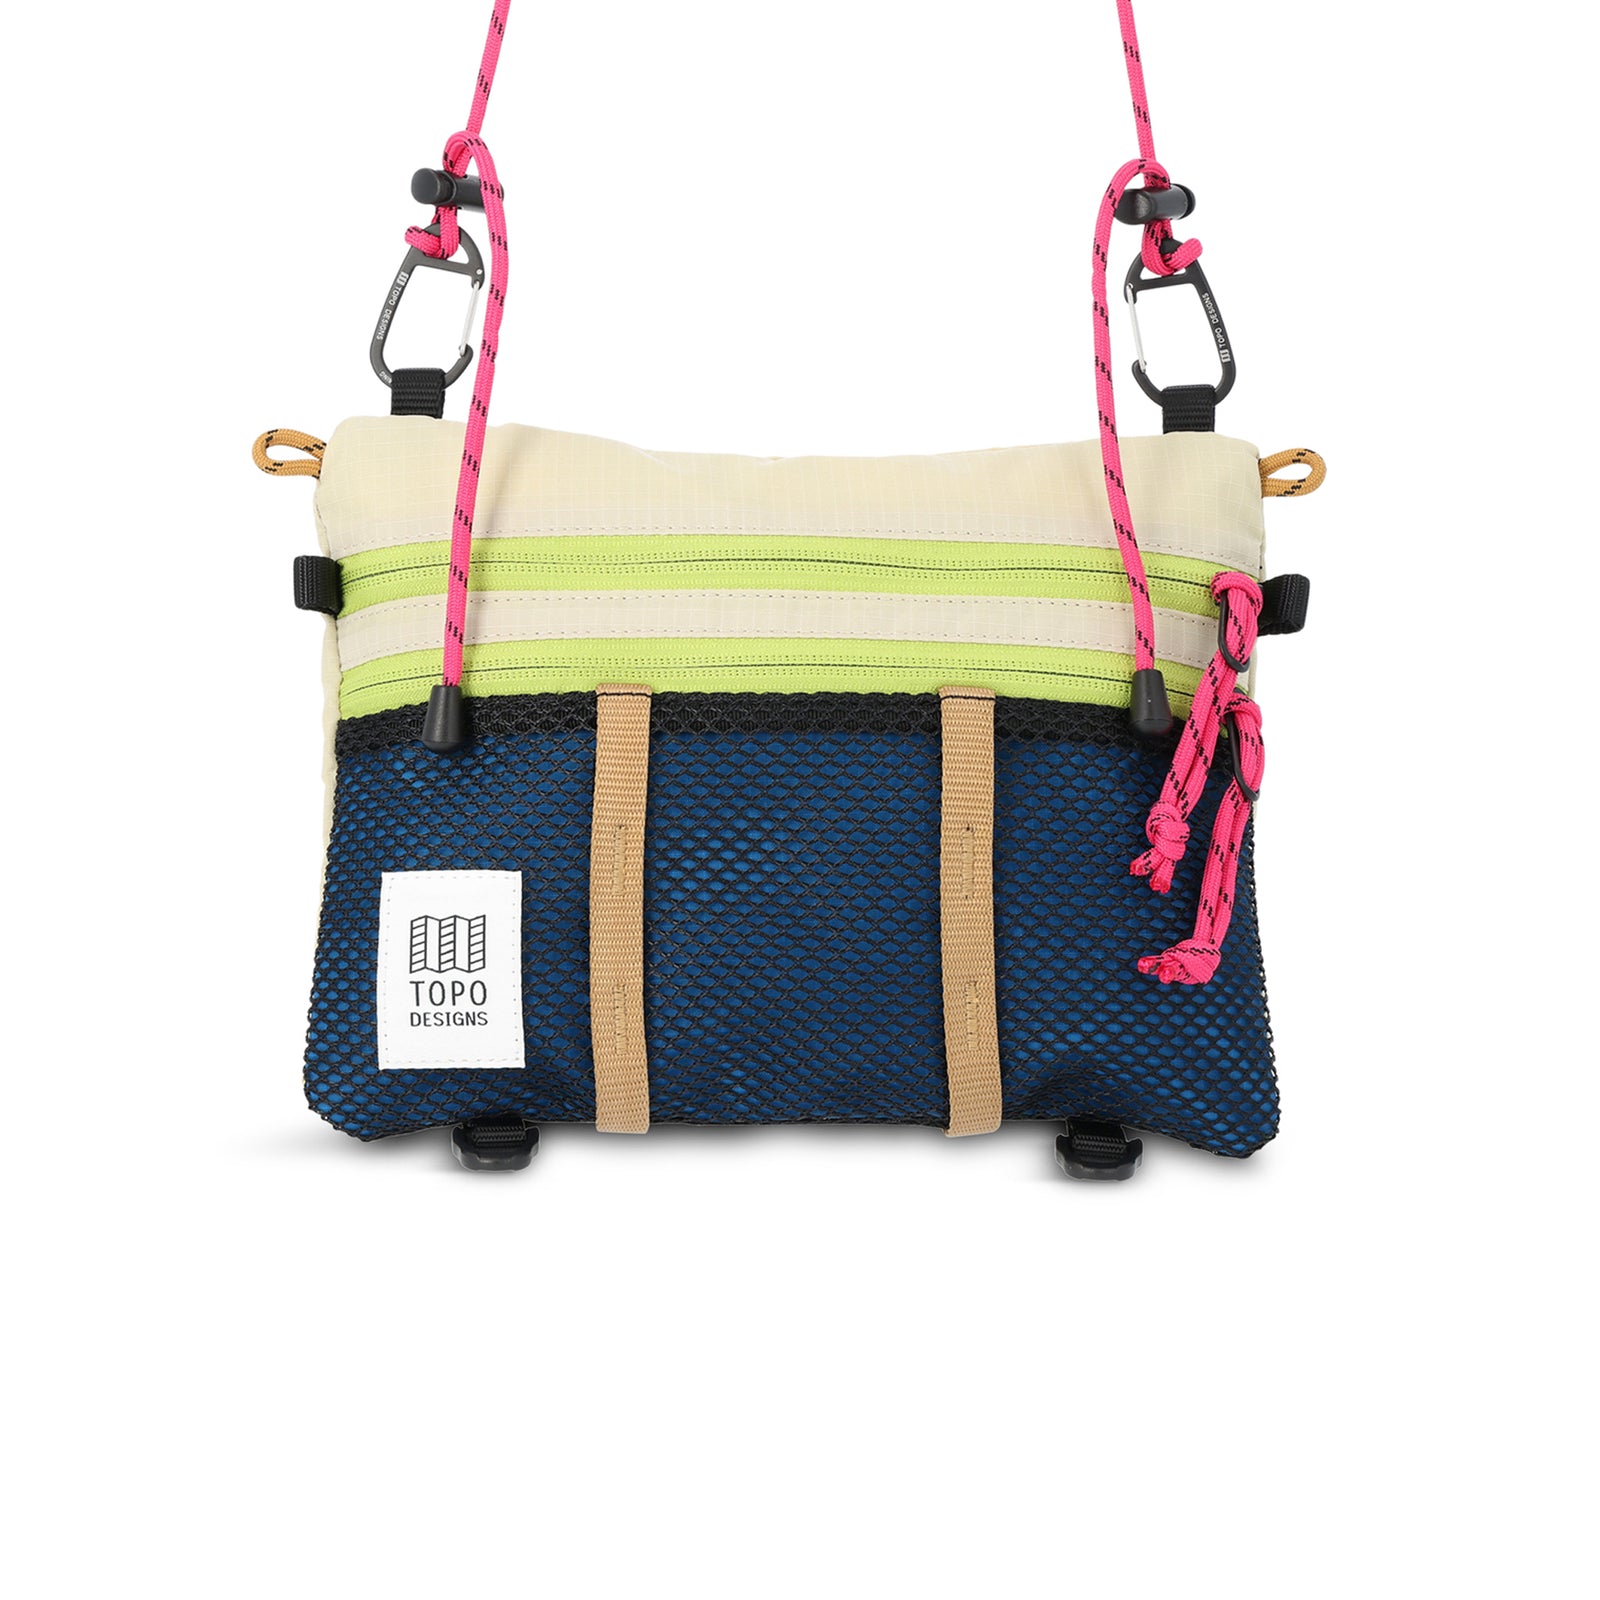 Topo Designs Mountain Accessory crossbody Shoulder Bag in "Bone White / Blue" lightweight recycled nylon.